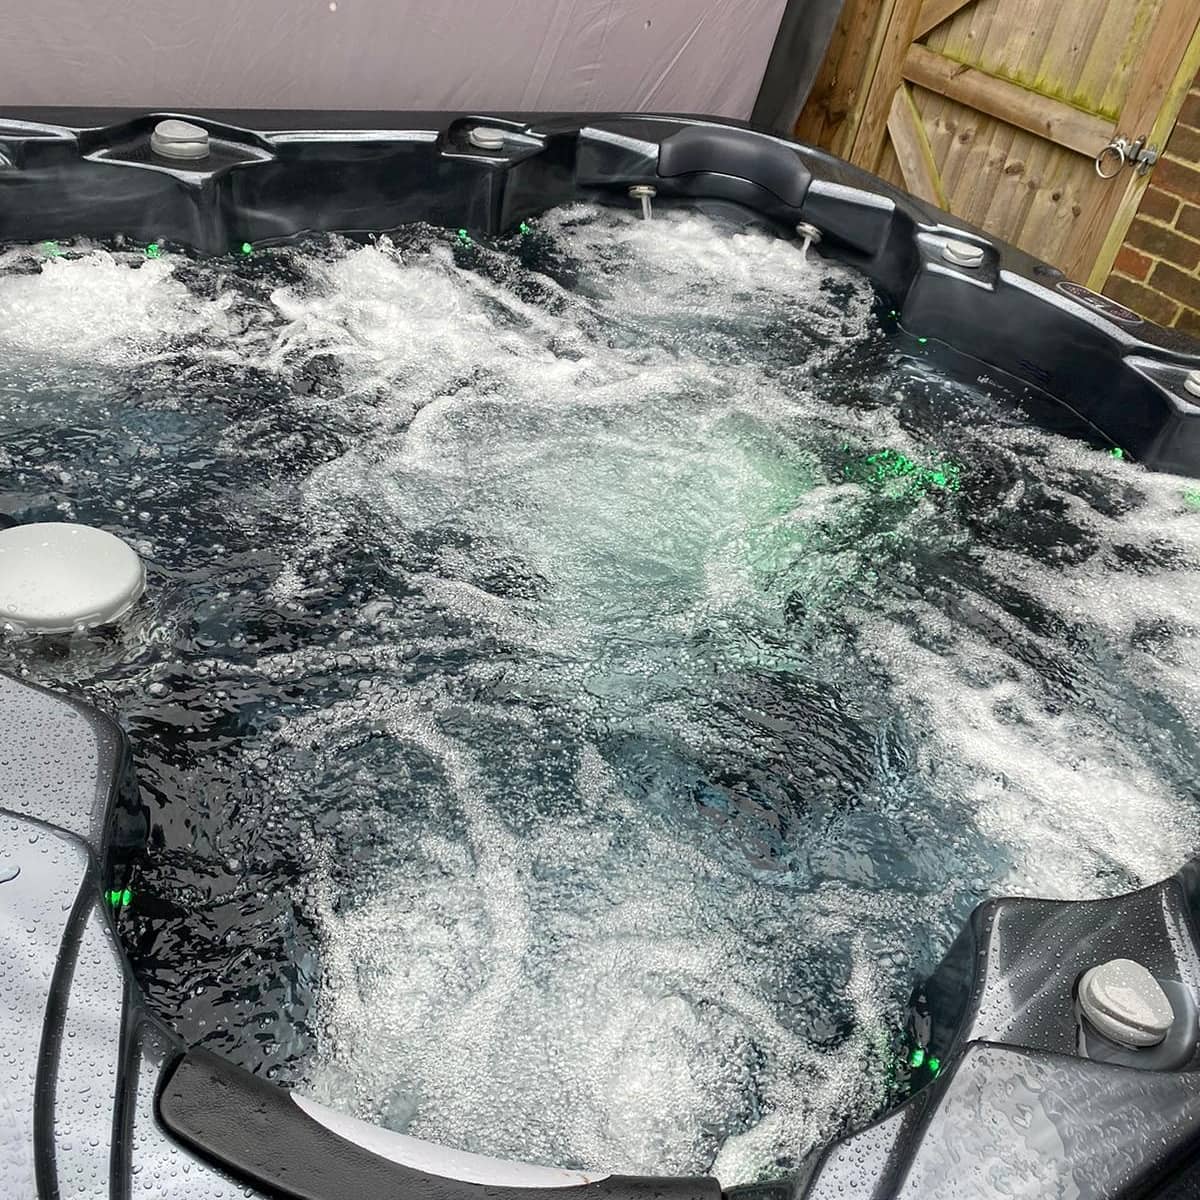 Tropic 7 Seater Hot Tub - Vookoo Lifestyle